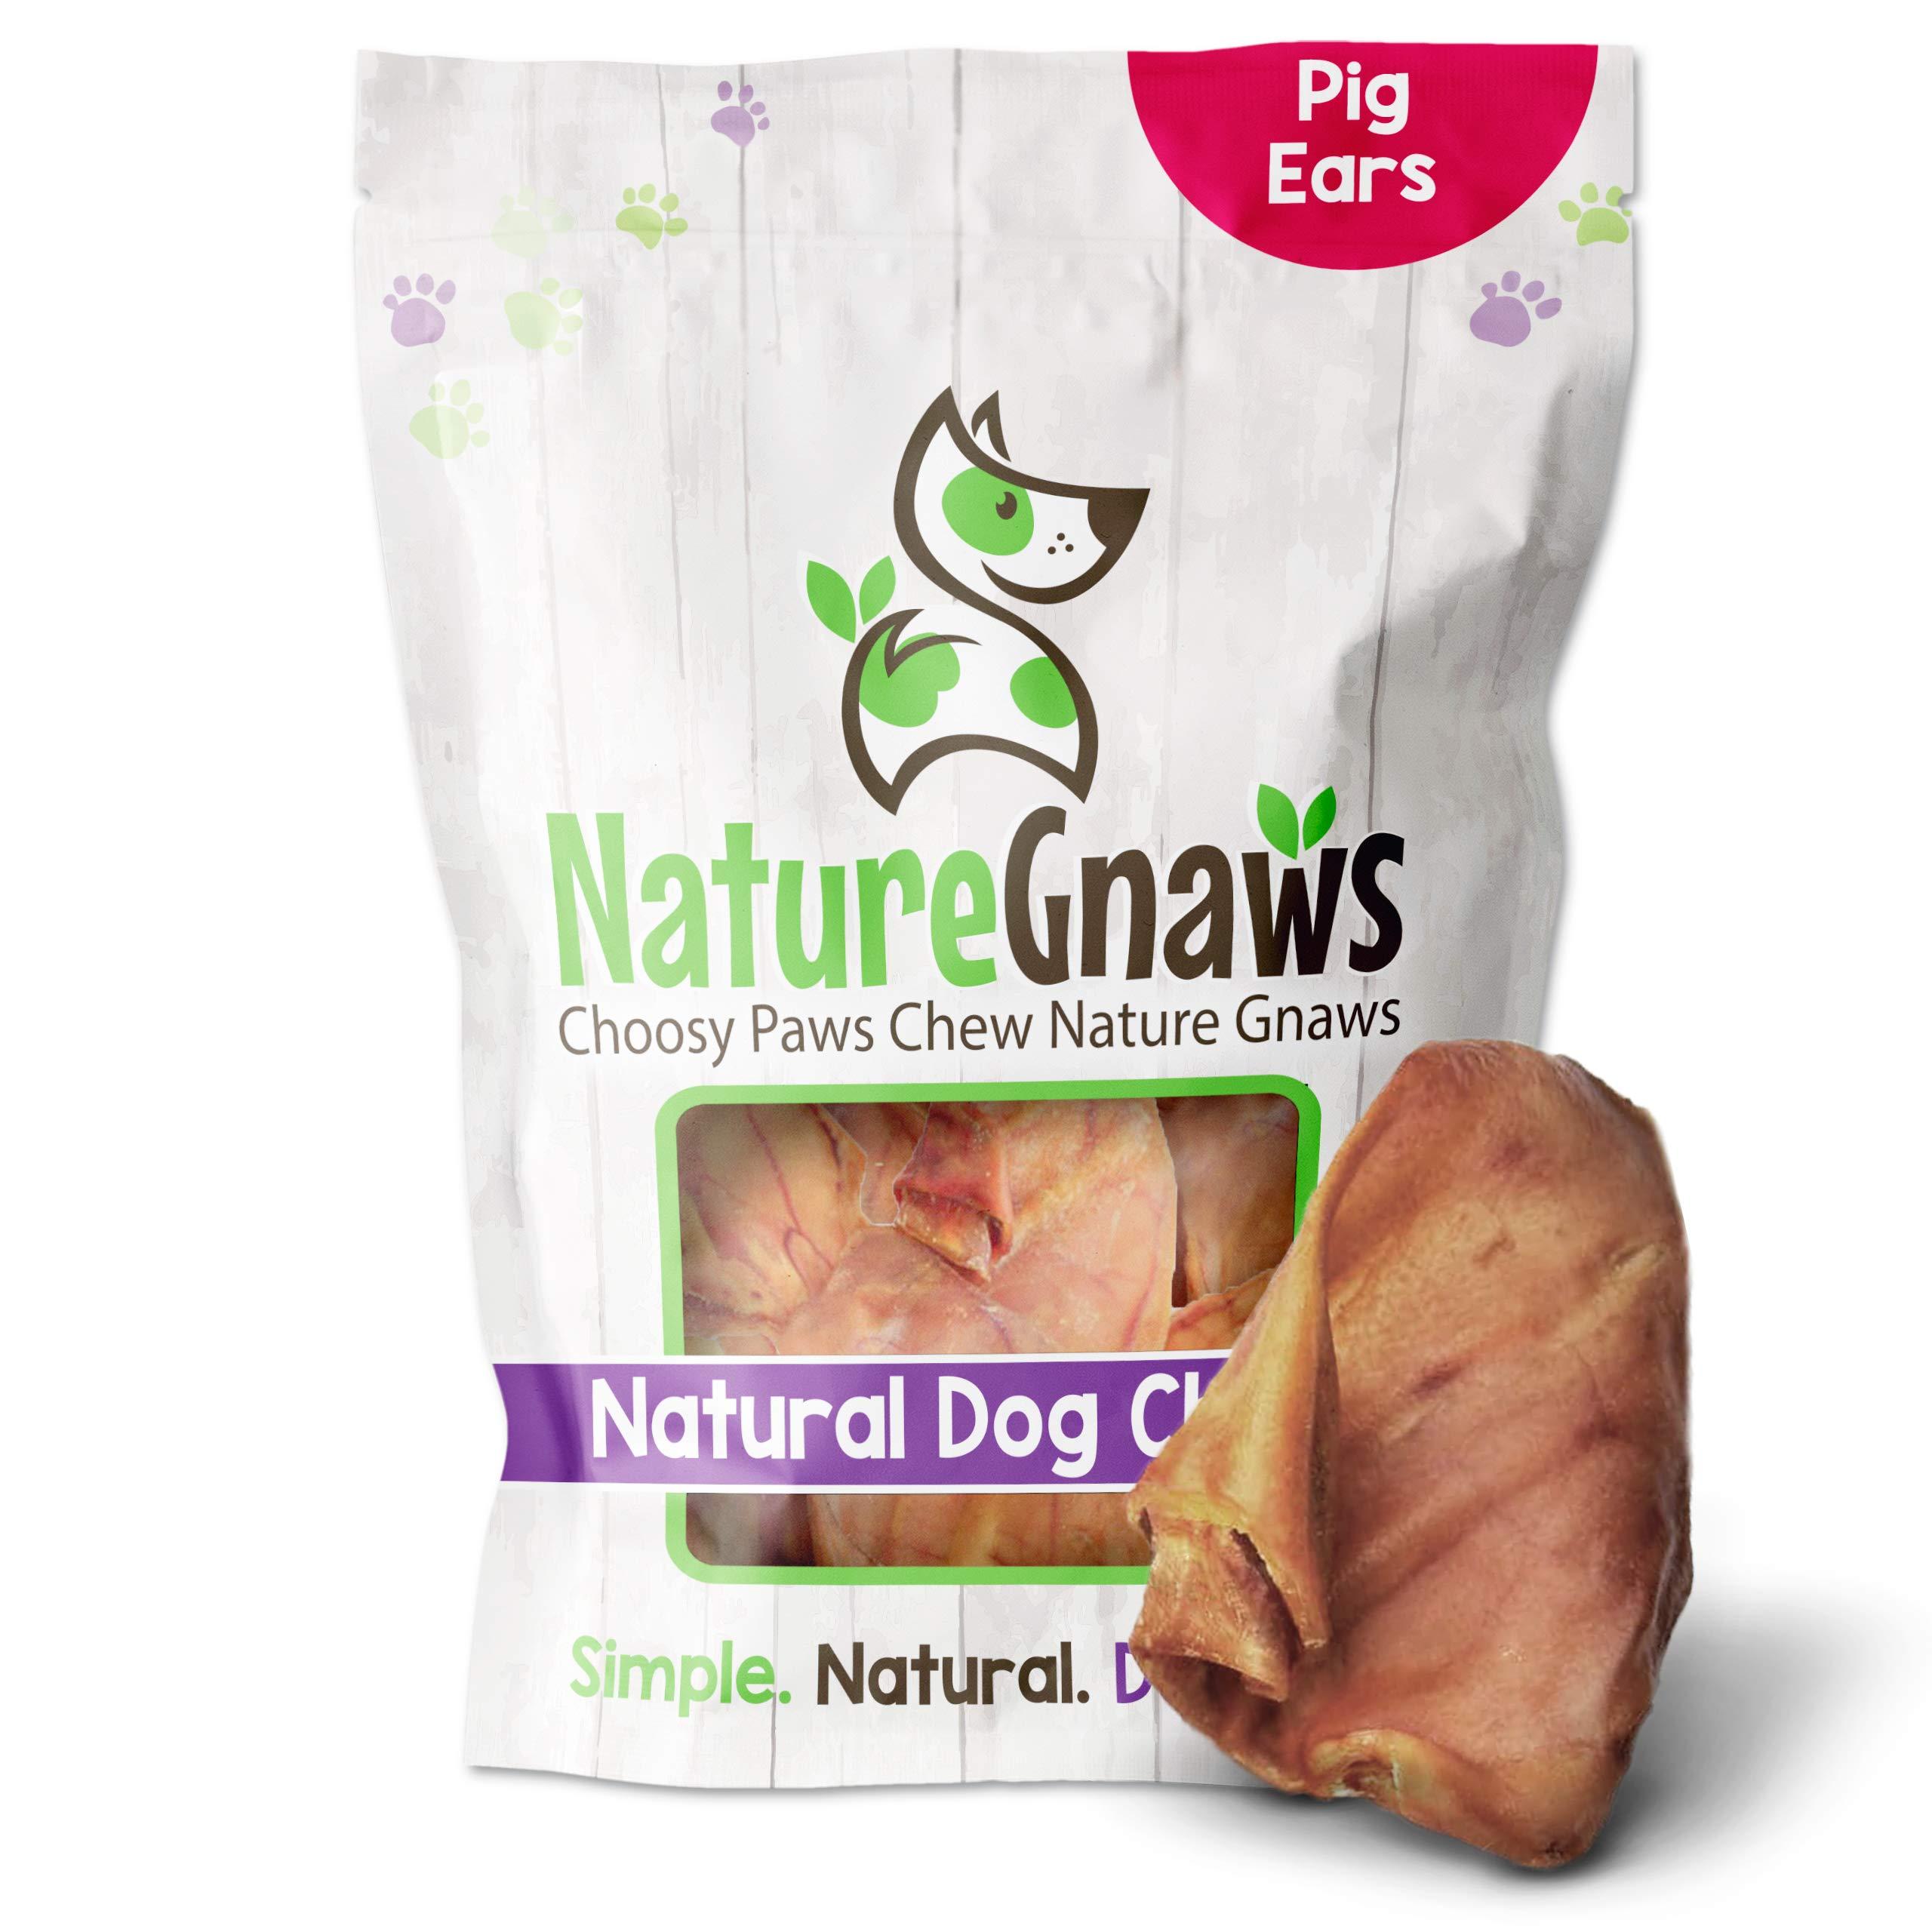 Nature Gnaws Pig Ears for Dogs - Premium Natural Pork Dental Chews - Thick Long Lasting Dog Chew Treats for Aggressive Chewers - Rawhide Free